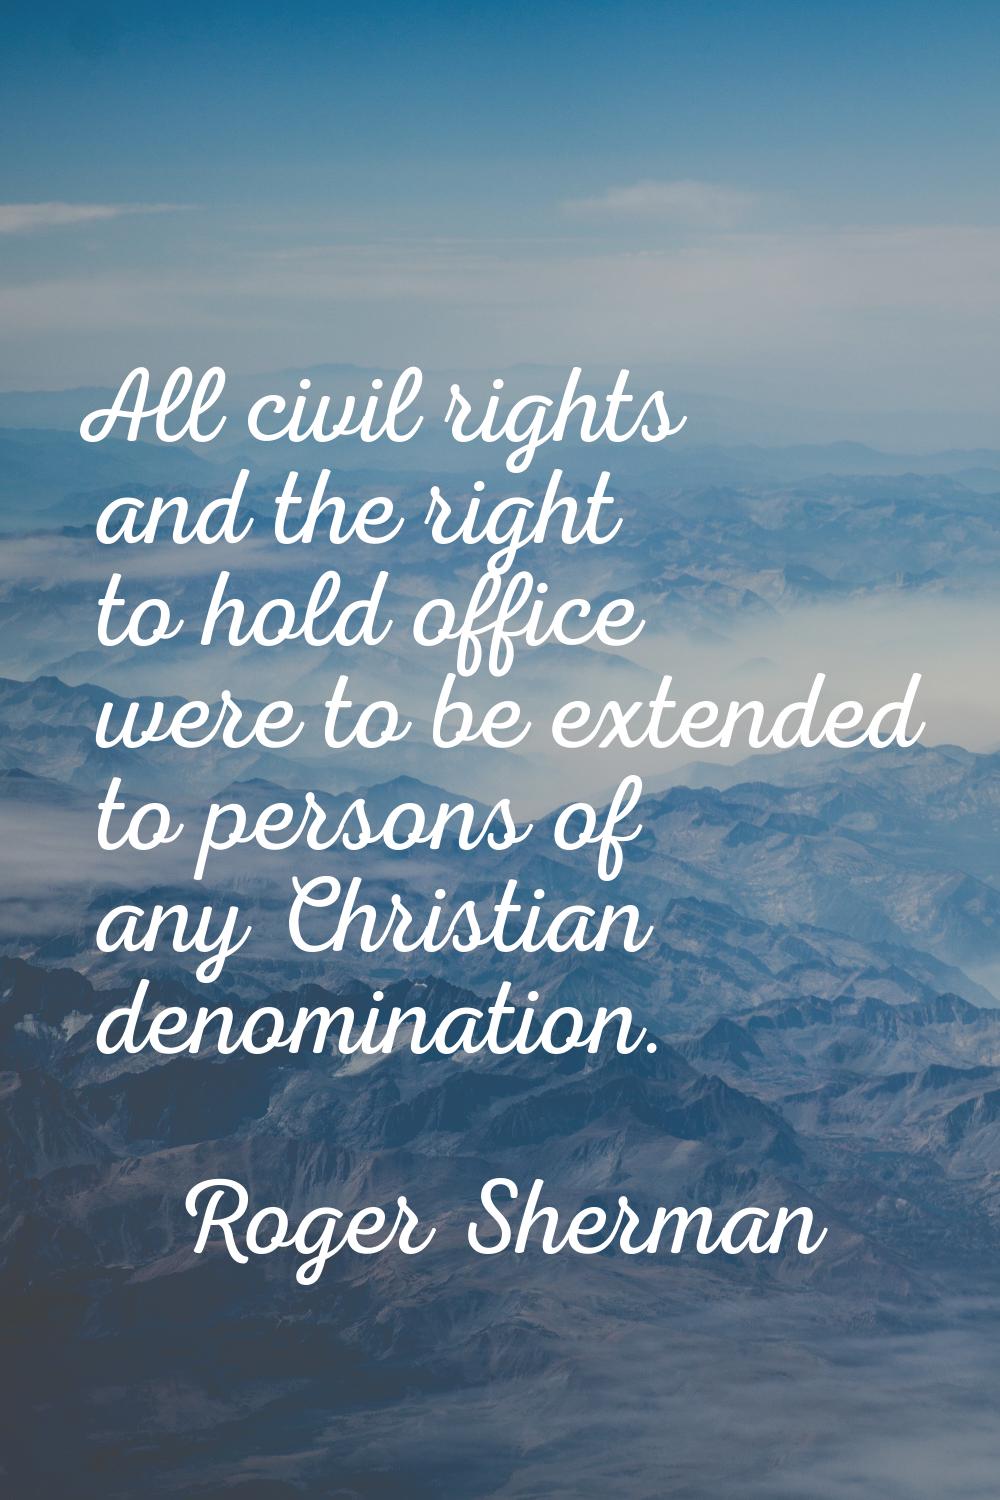 All civil rights and the right to hold office were to be extended to persons of any Christian denom